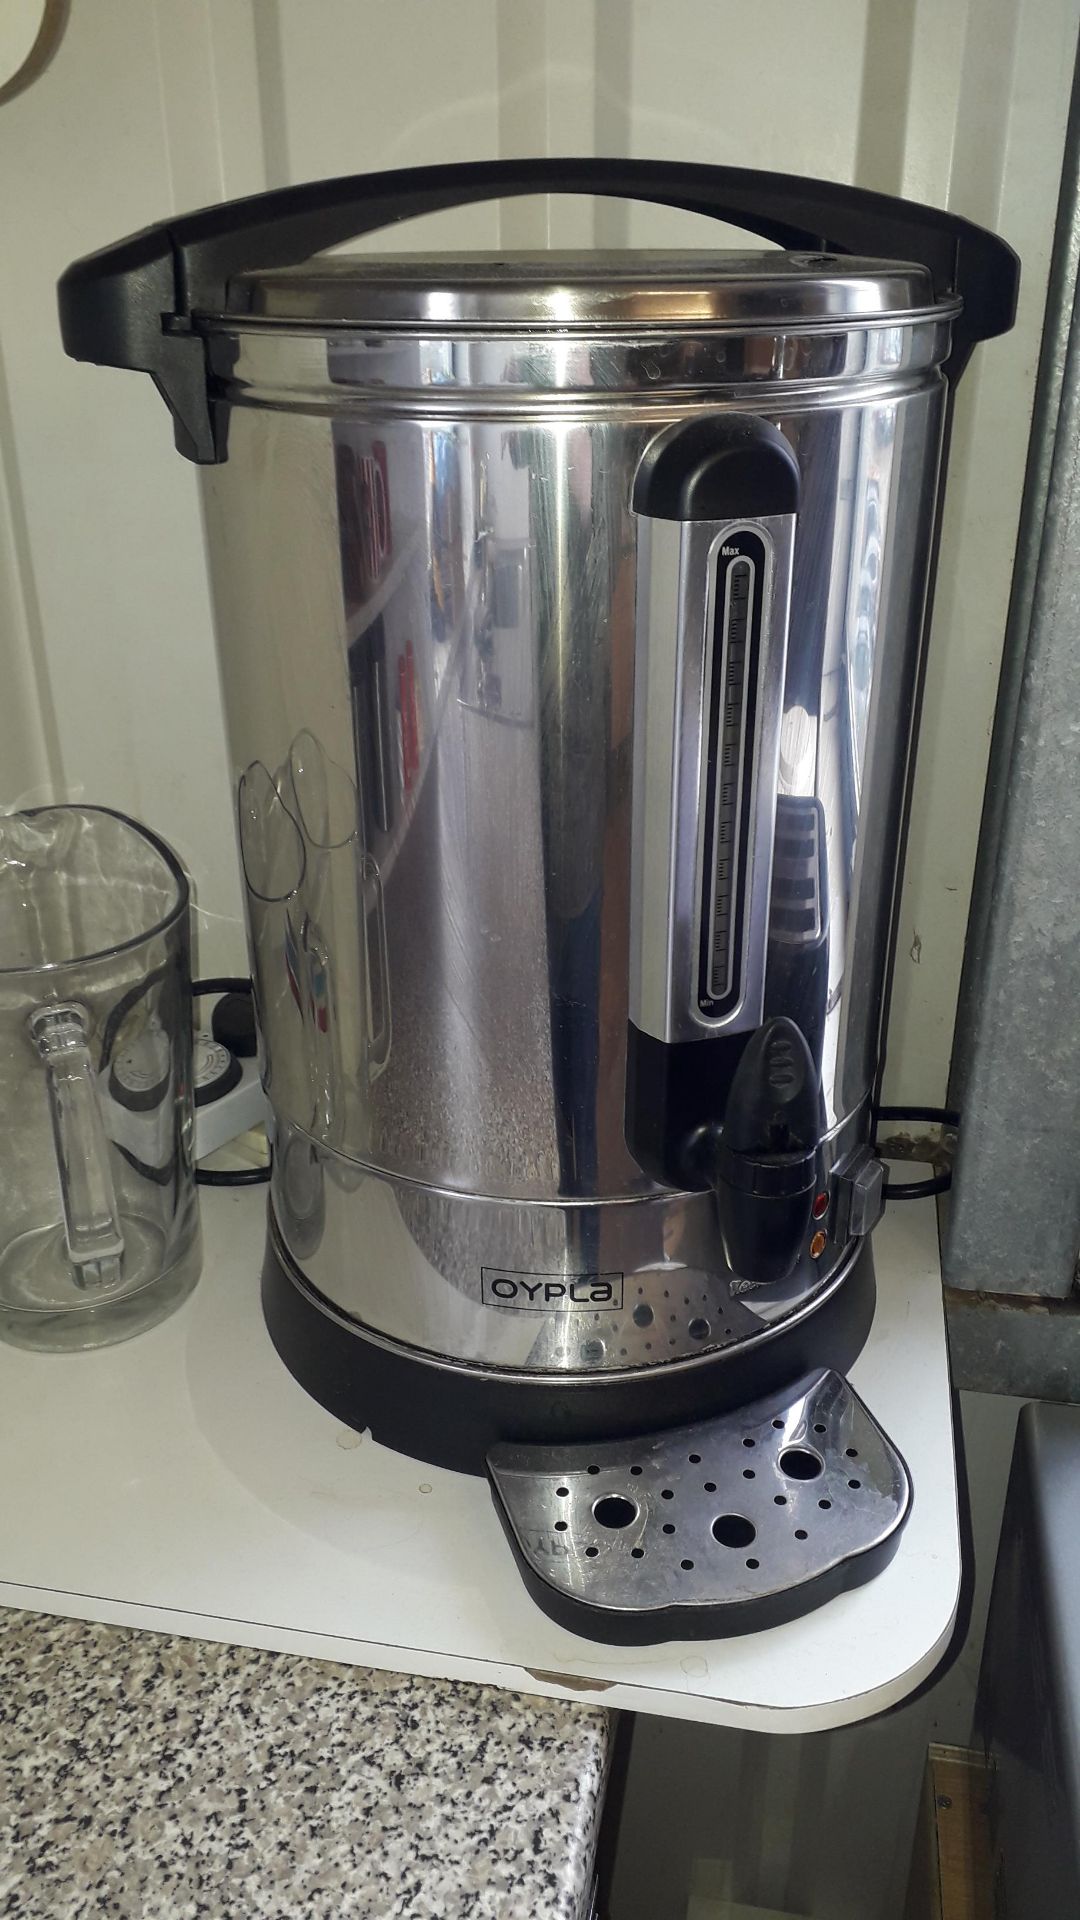 Oypla 20 Litre Counter Top Hot Water Boiler, S/N 3166 - Located on 1st Floor